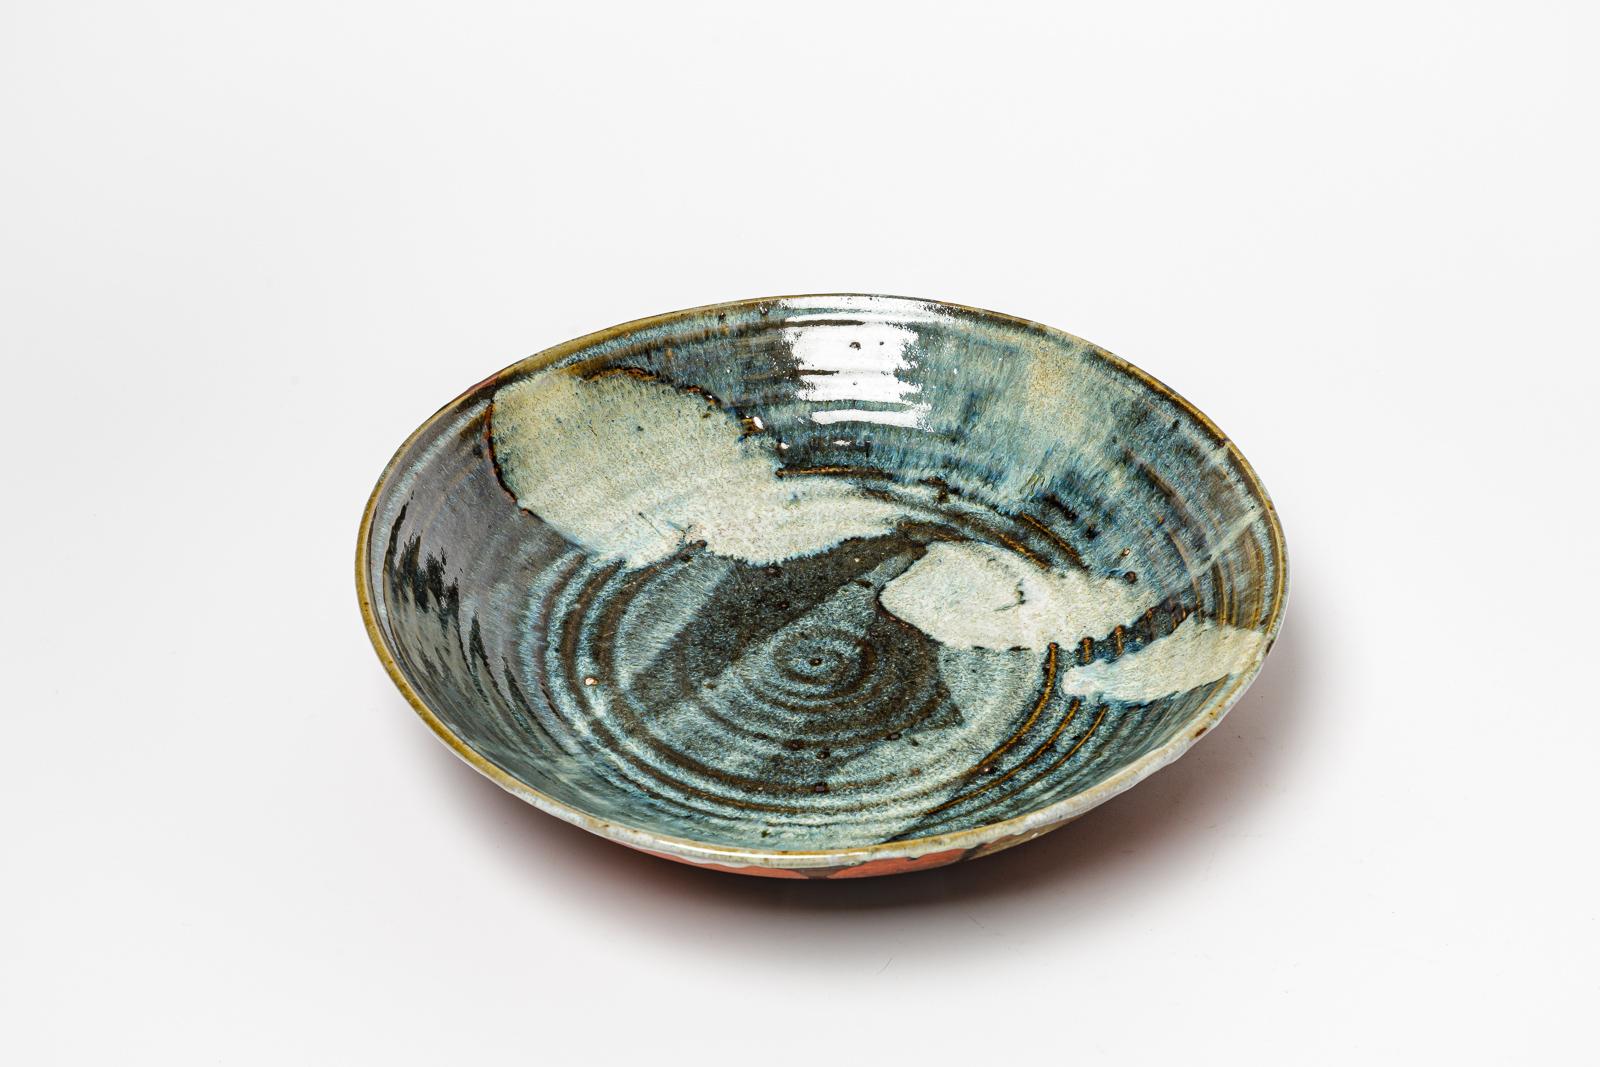 Beaux Arts Glazed stoneware plate by Raoul Favretto, circa 1980-1990. For Sale